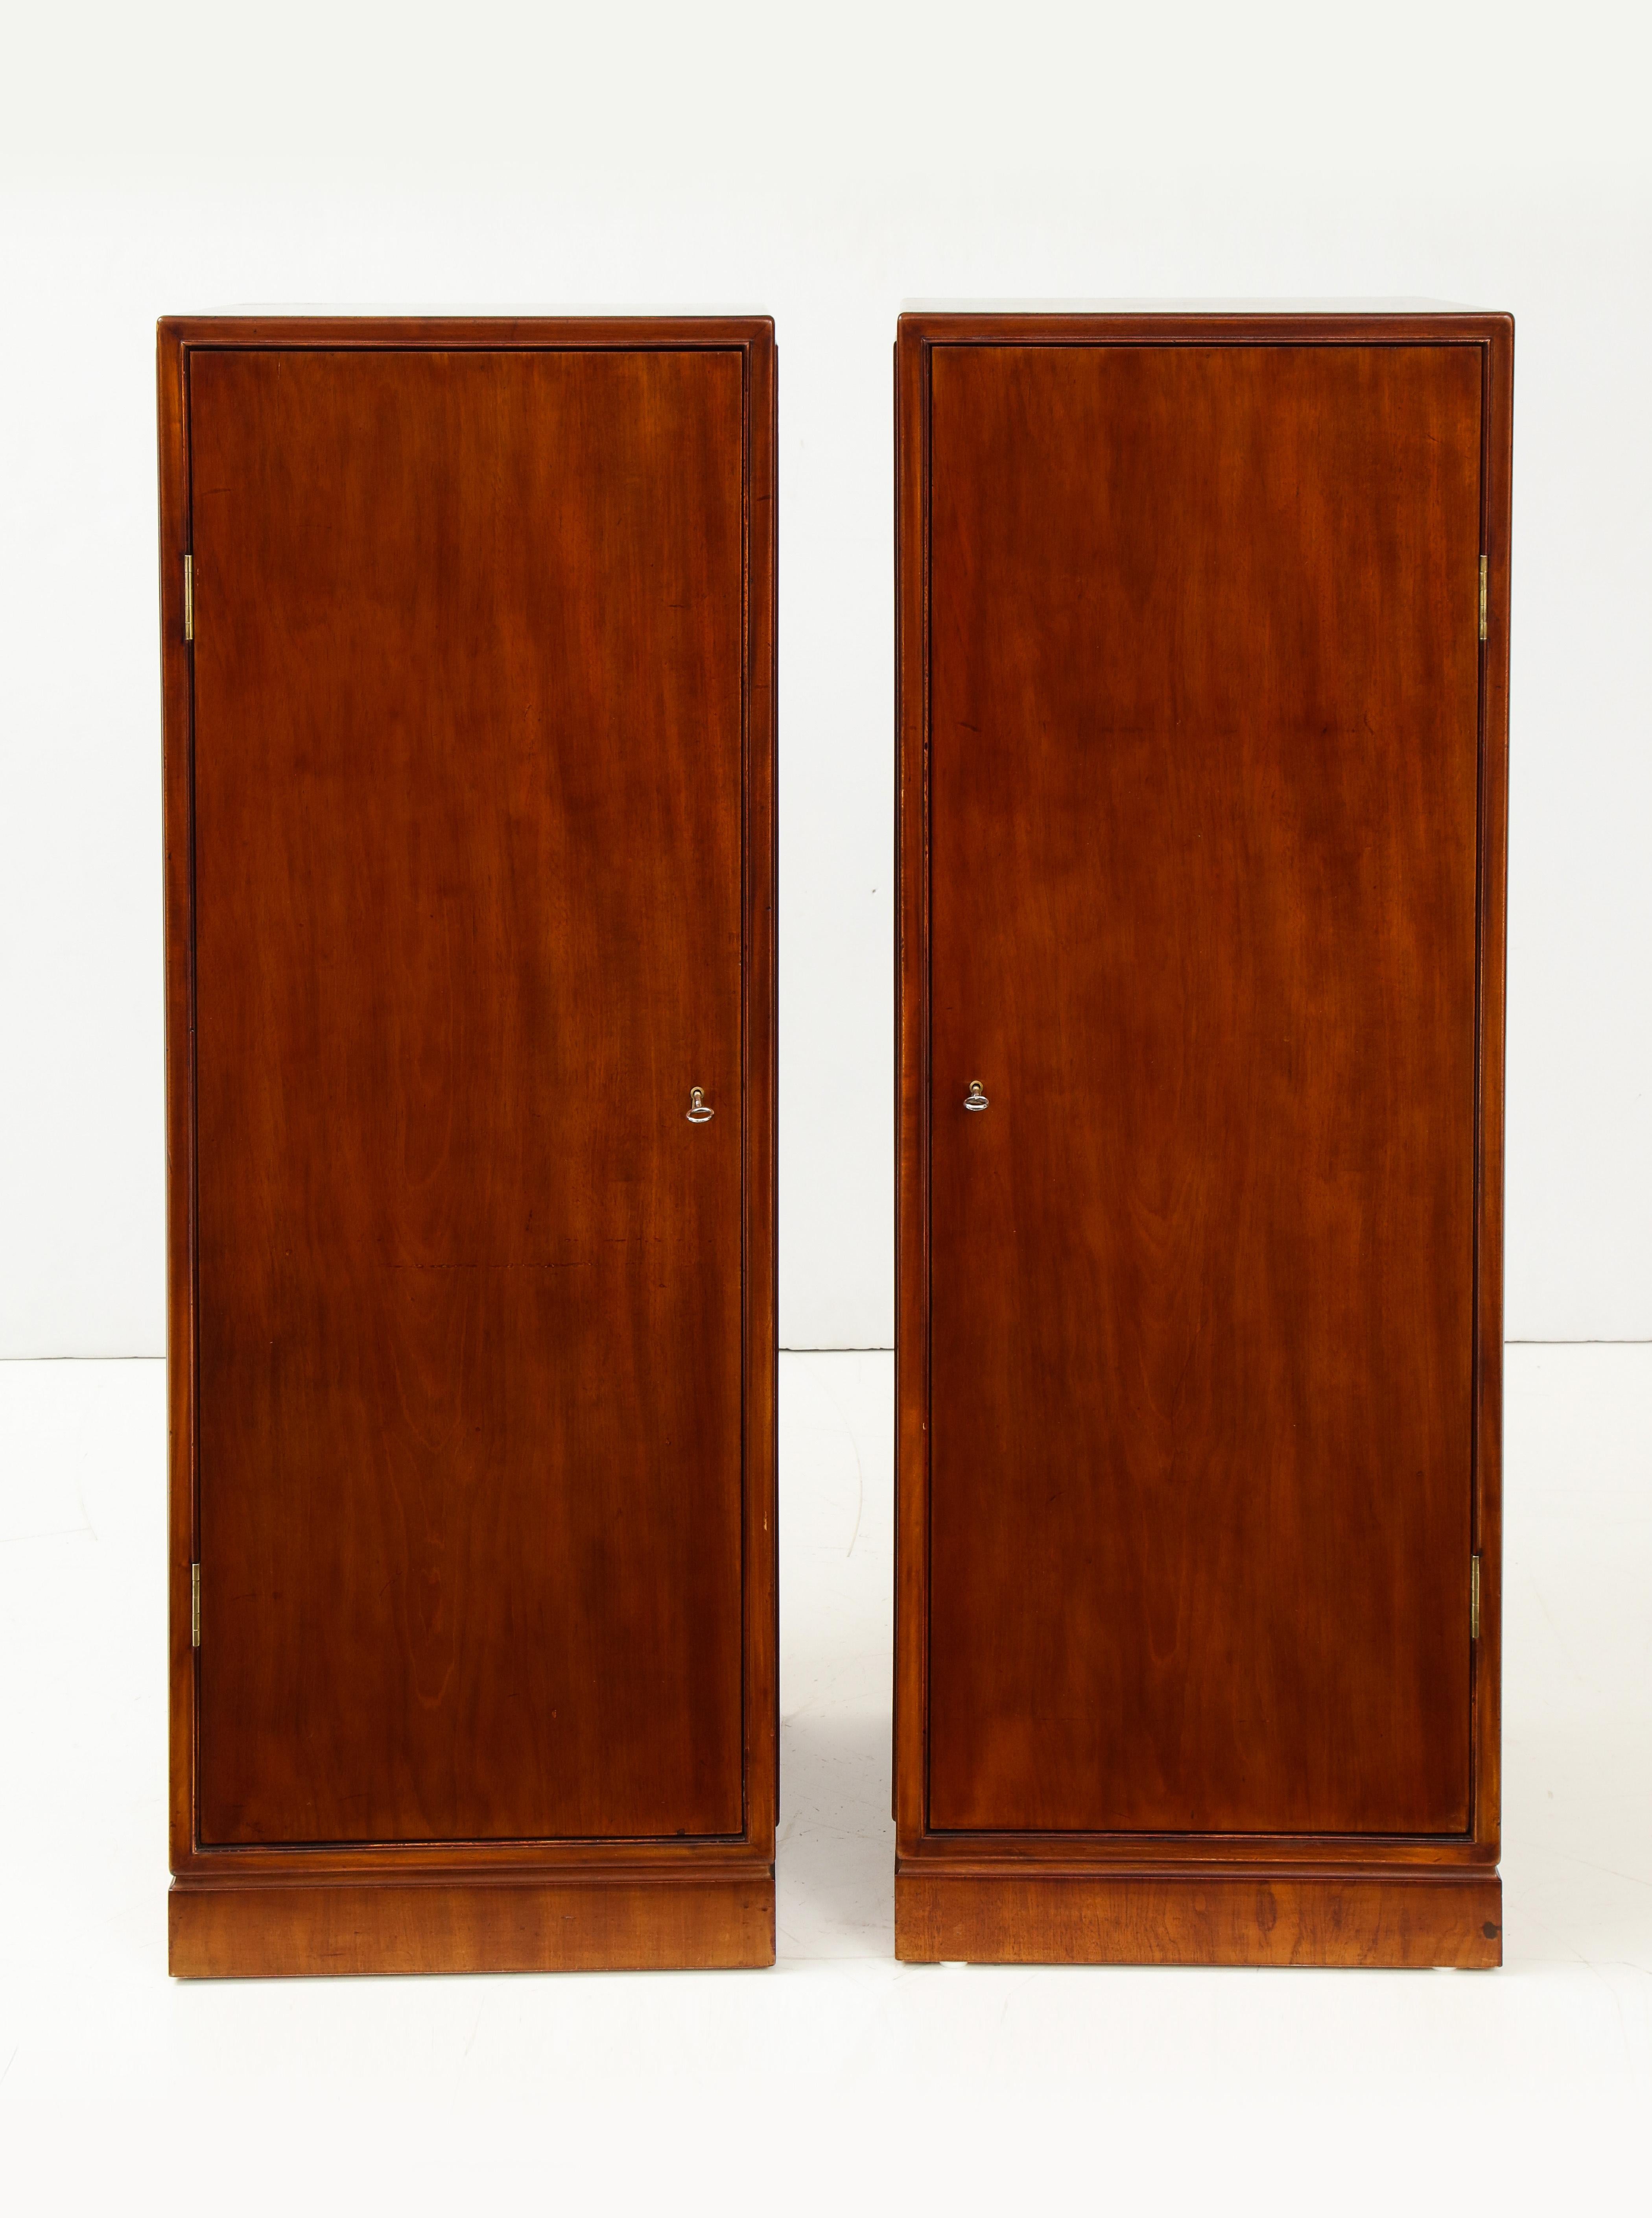 A pair of Danish mahogany freestanding pedestal cabinets by Frits Henningsen, circa 1940s, the square top above paneled sides all around and a single door, raised on a pedestal base. Shelves inside. Two shelves replaced. 
Handsome and restrained